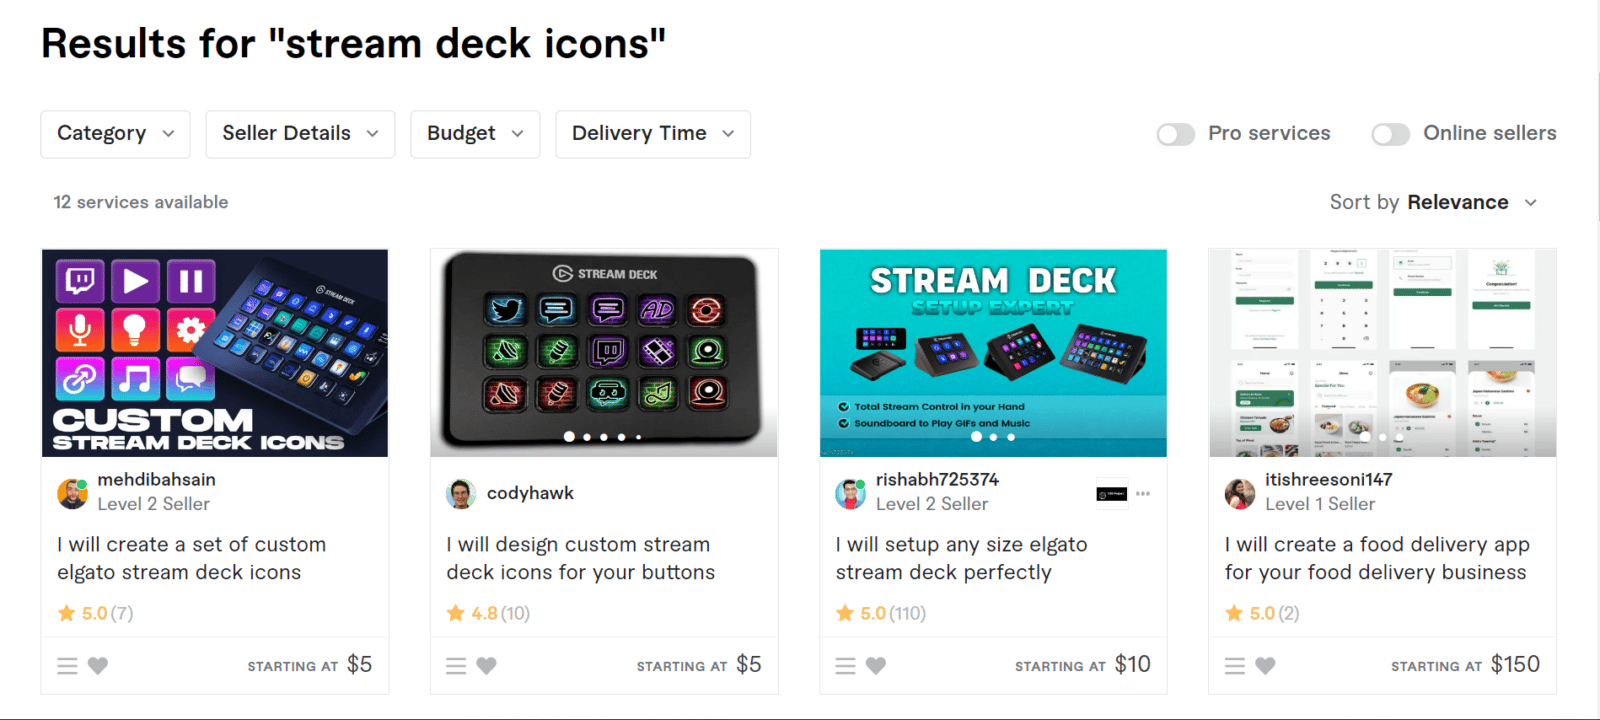 Top 7 Places To Download Stream Deck Icons - 2024 Rankings!